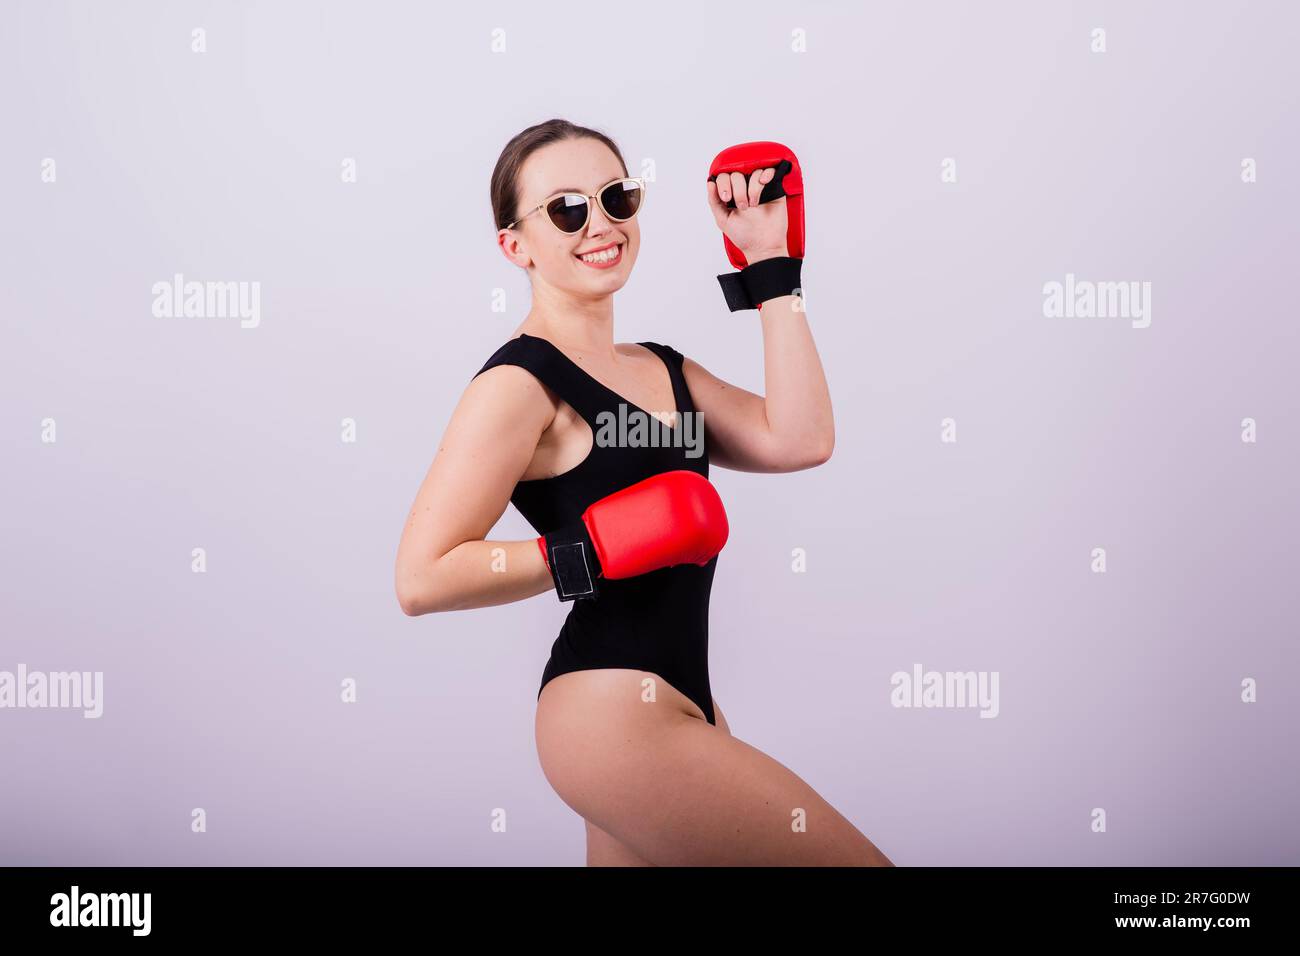 Young Woman In Leotard Doing Fitness Punching Exercises Stock